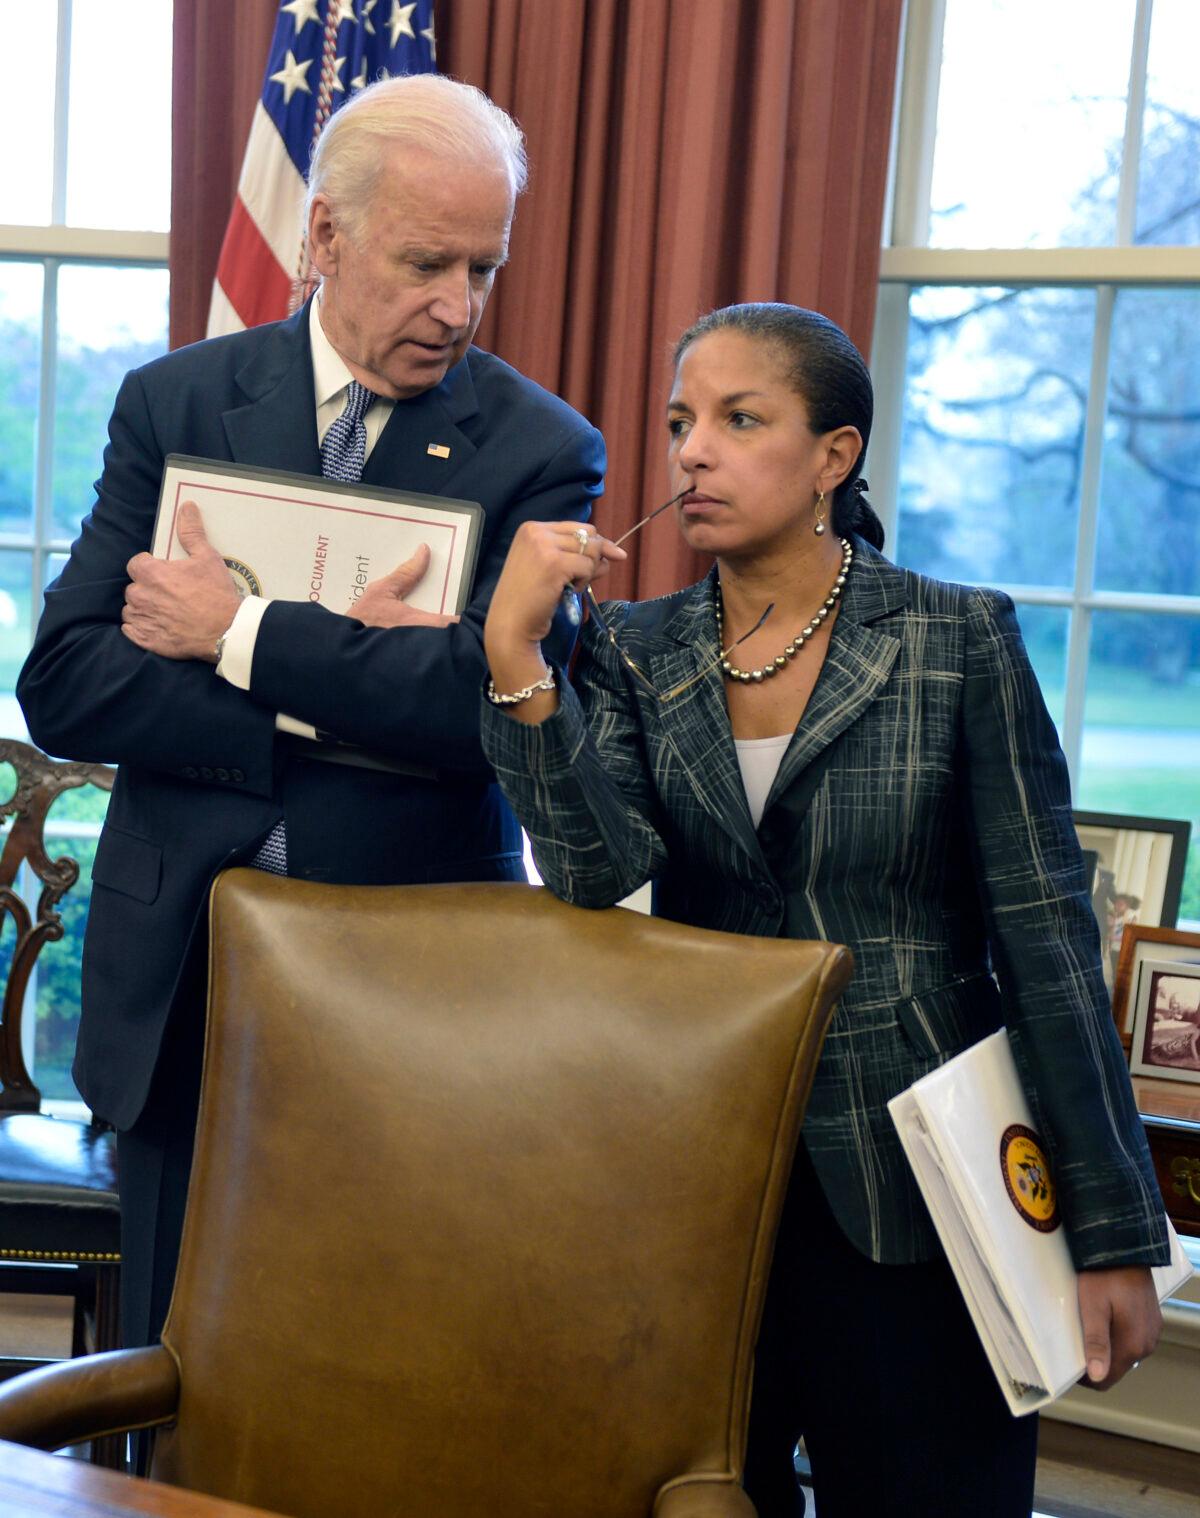 Then-Vice President Joe Biden (L) and then-National Security Advisor Susan Rice talk as then-President Barack Obama and then-Iraqi Prime Minister Haider al-Abadi brief the press after a bilateral meeting in the Oval Office of the White House in Washington on April 14, 2015. (Mike Theiler/Getty Images)